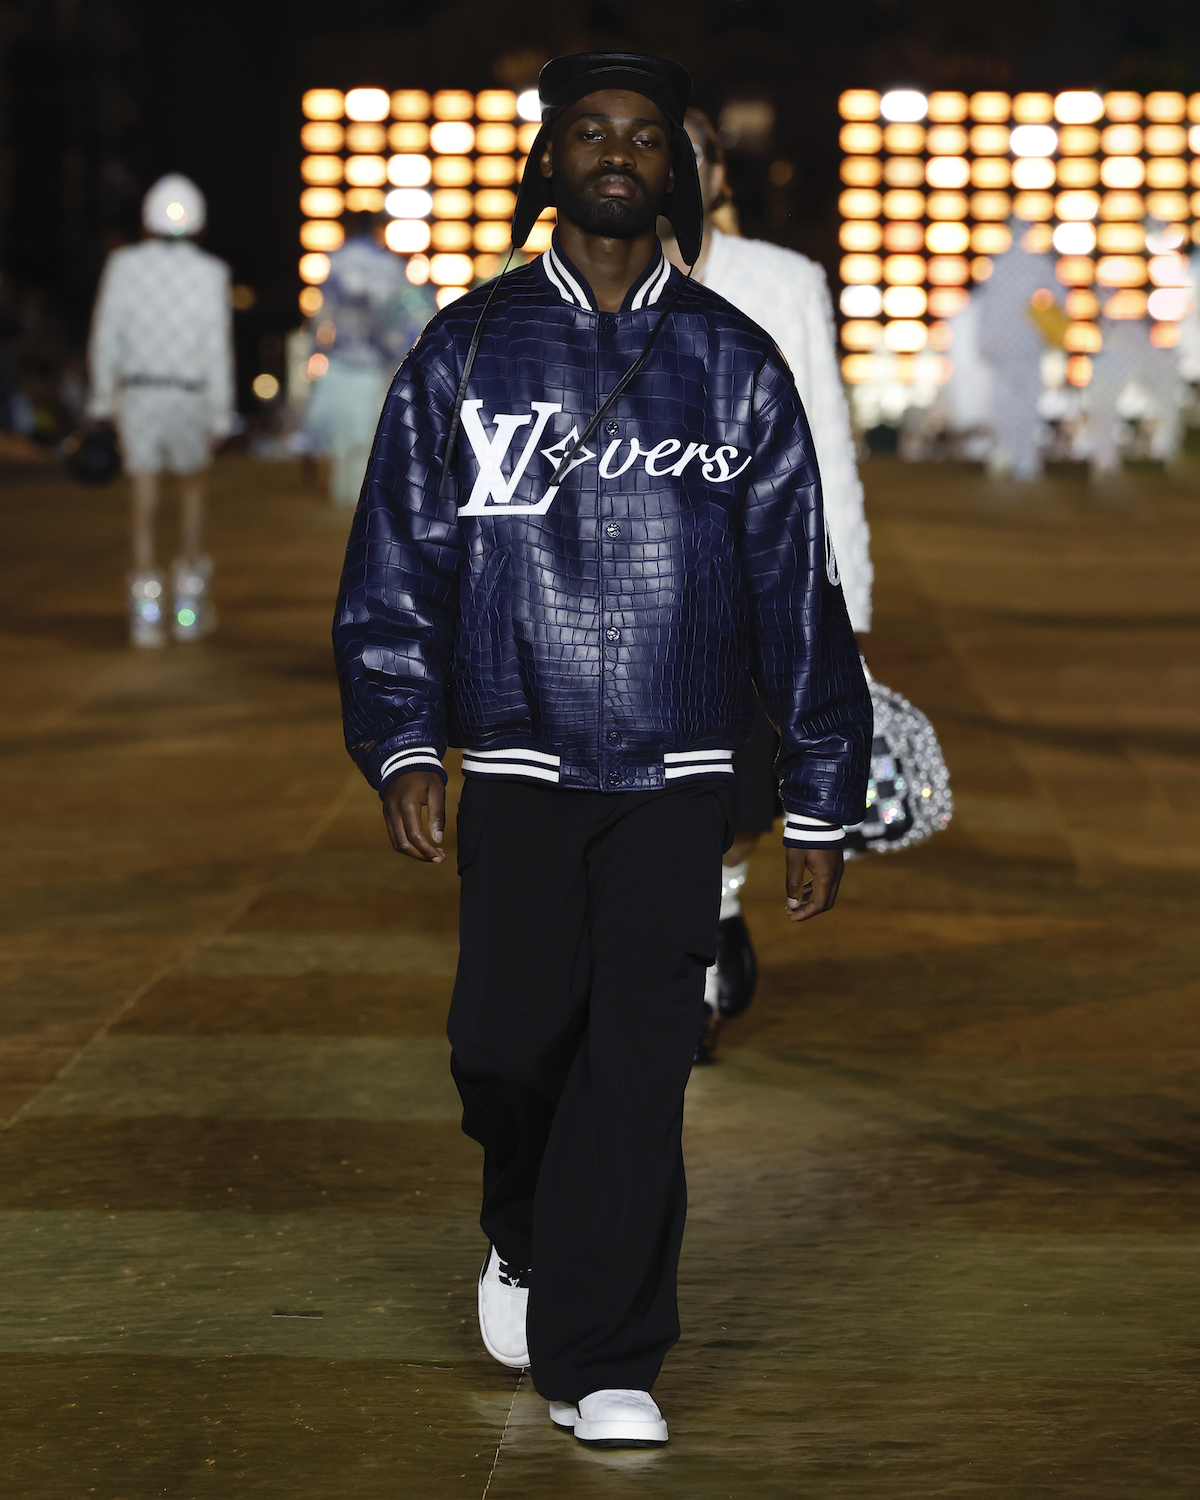 Best Louis Vuitton Reflective Jacket for sale in Canton, Ohio for 2023